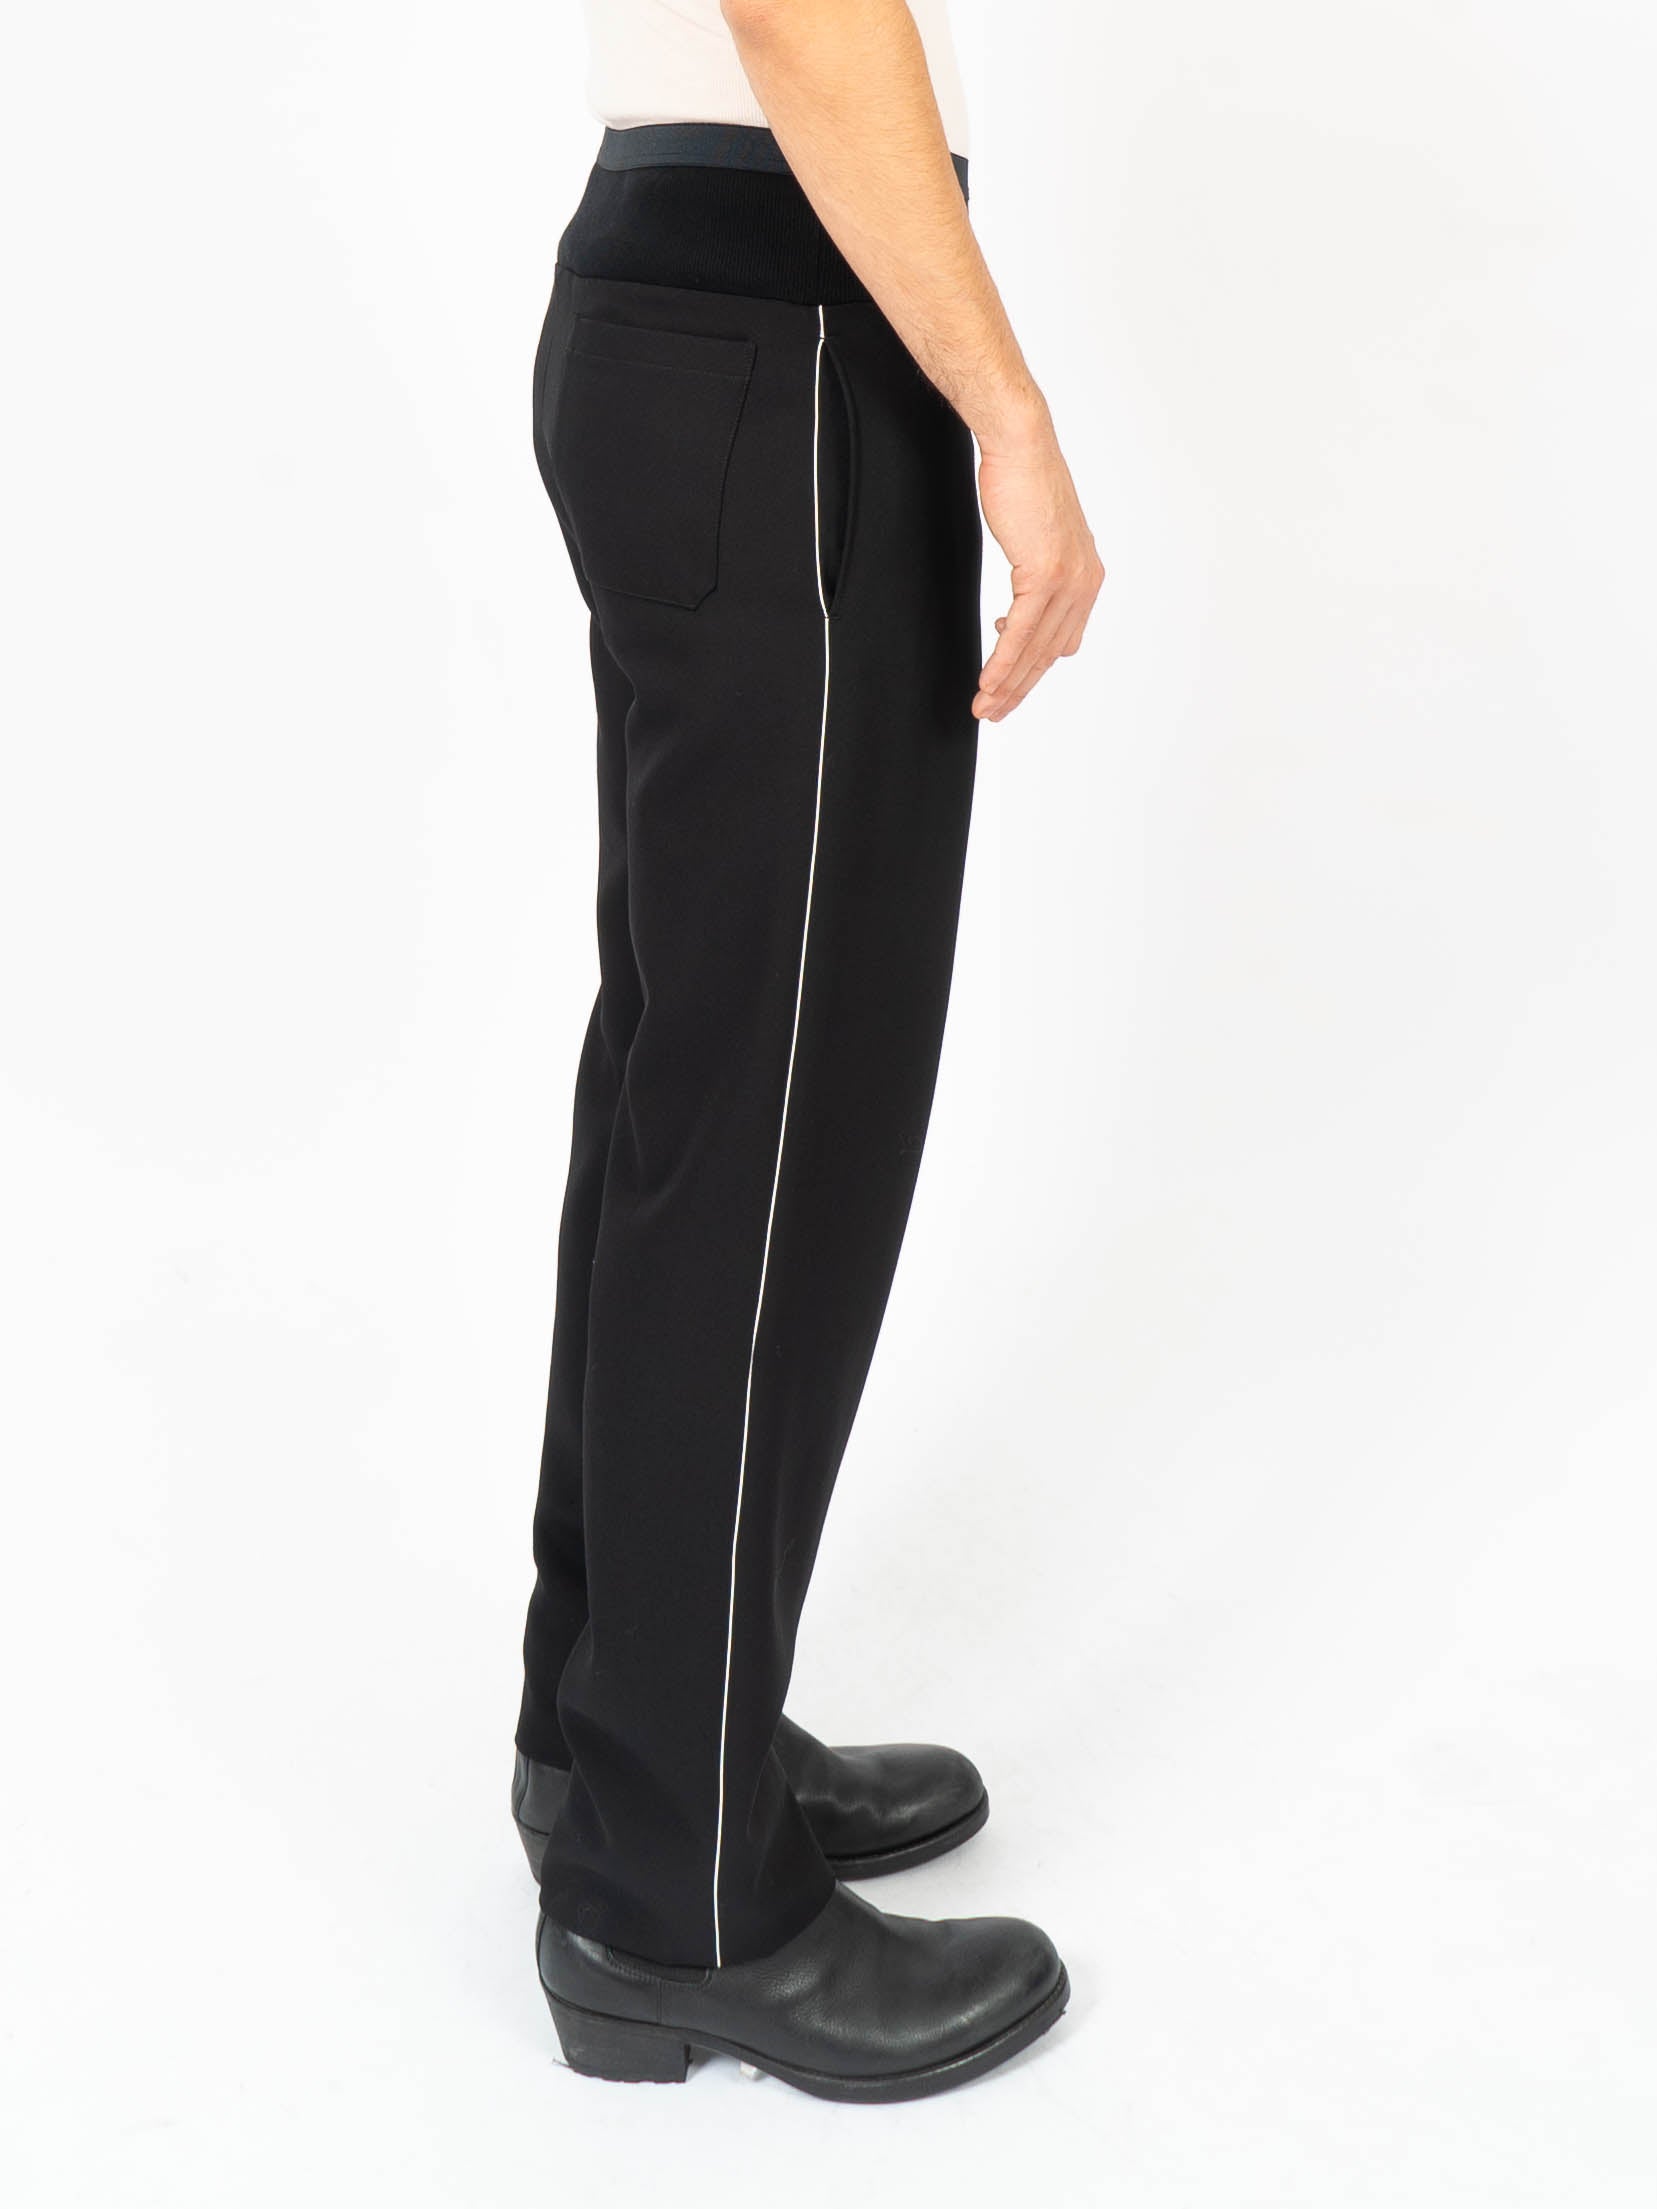 SS20 Black Relaxed Wool Trousers with Elastic Waist